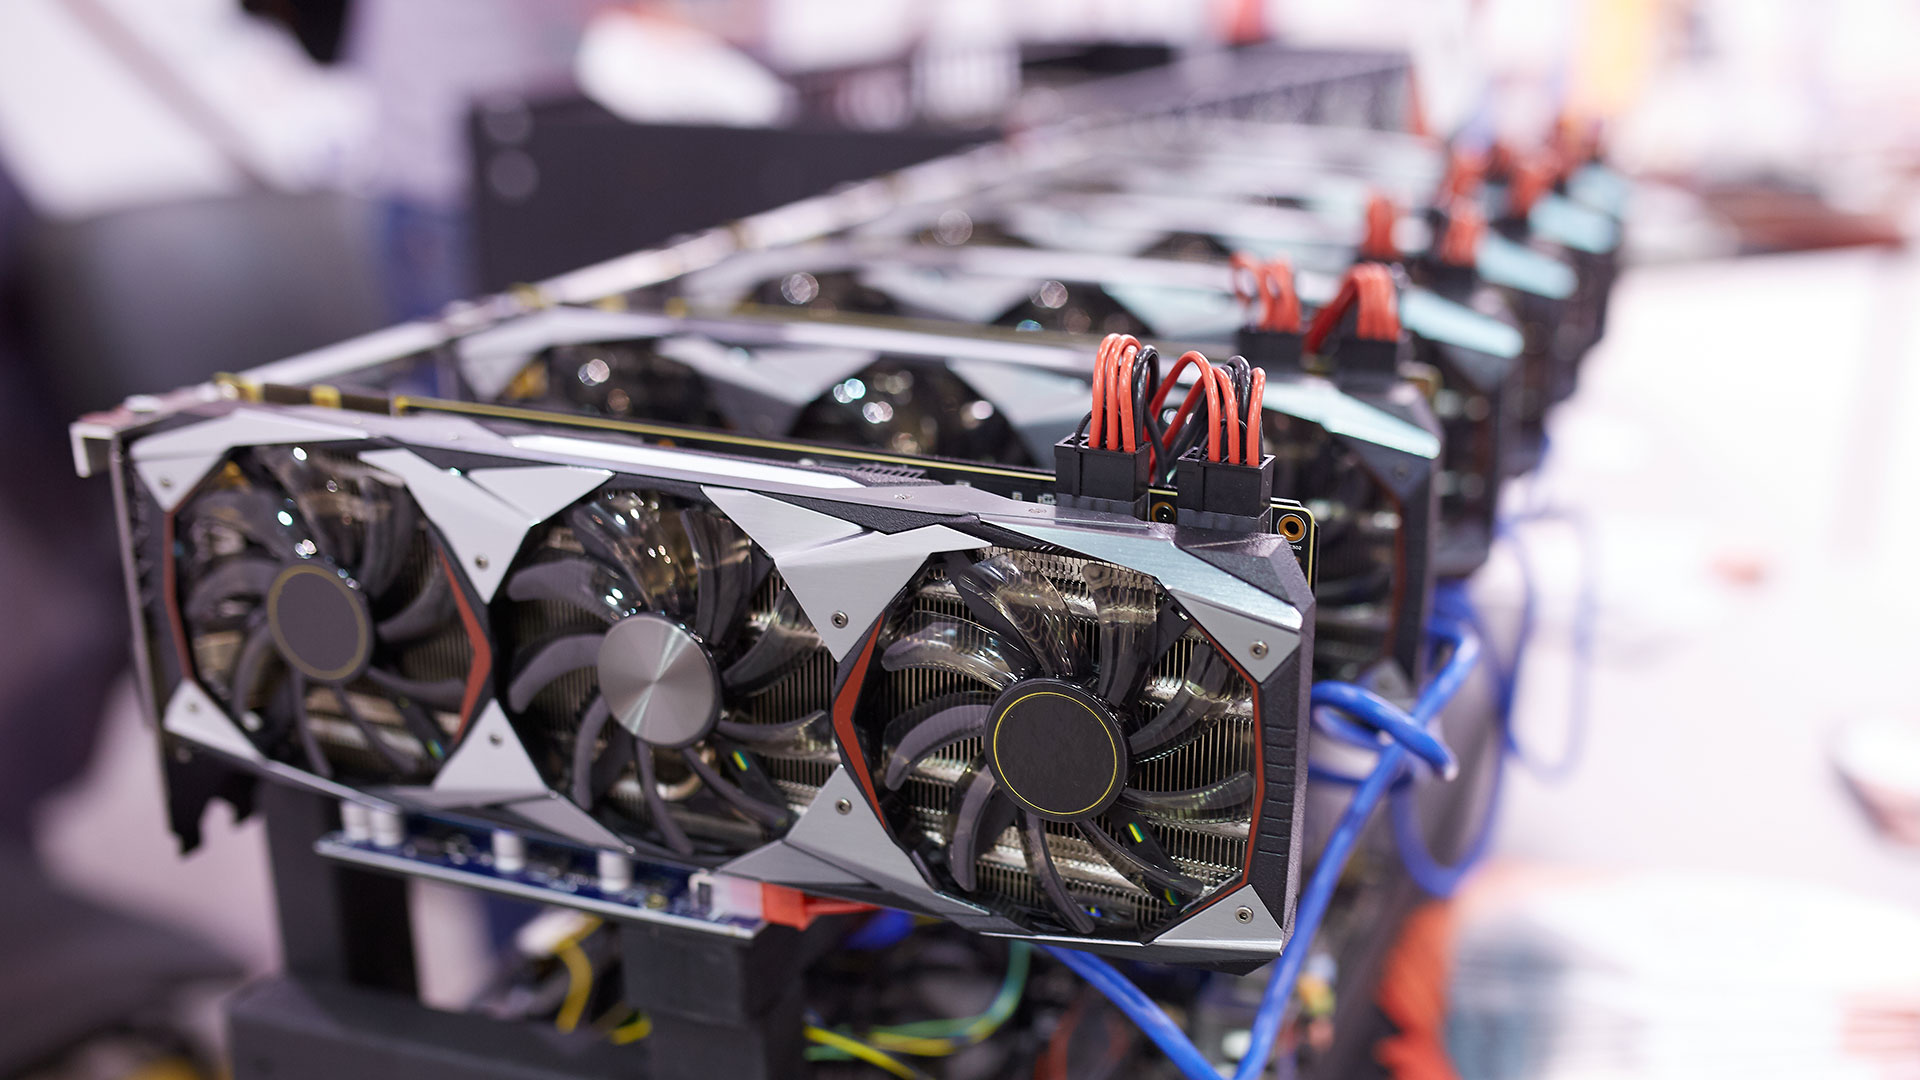 700,000-gpus-shipped-to-miners-in-the-first-quarter-of-2021